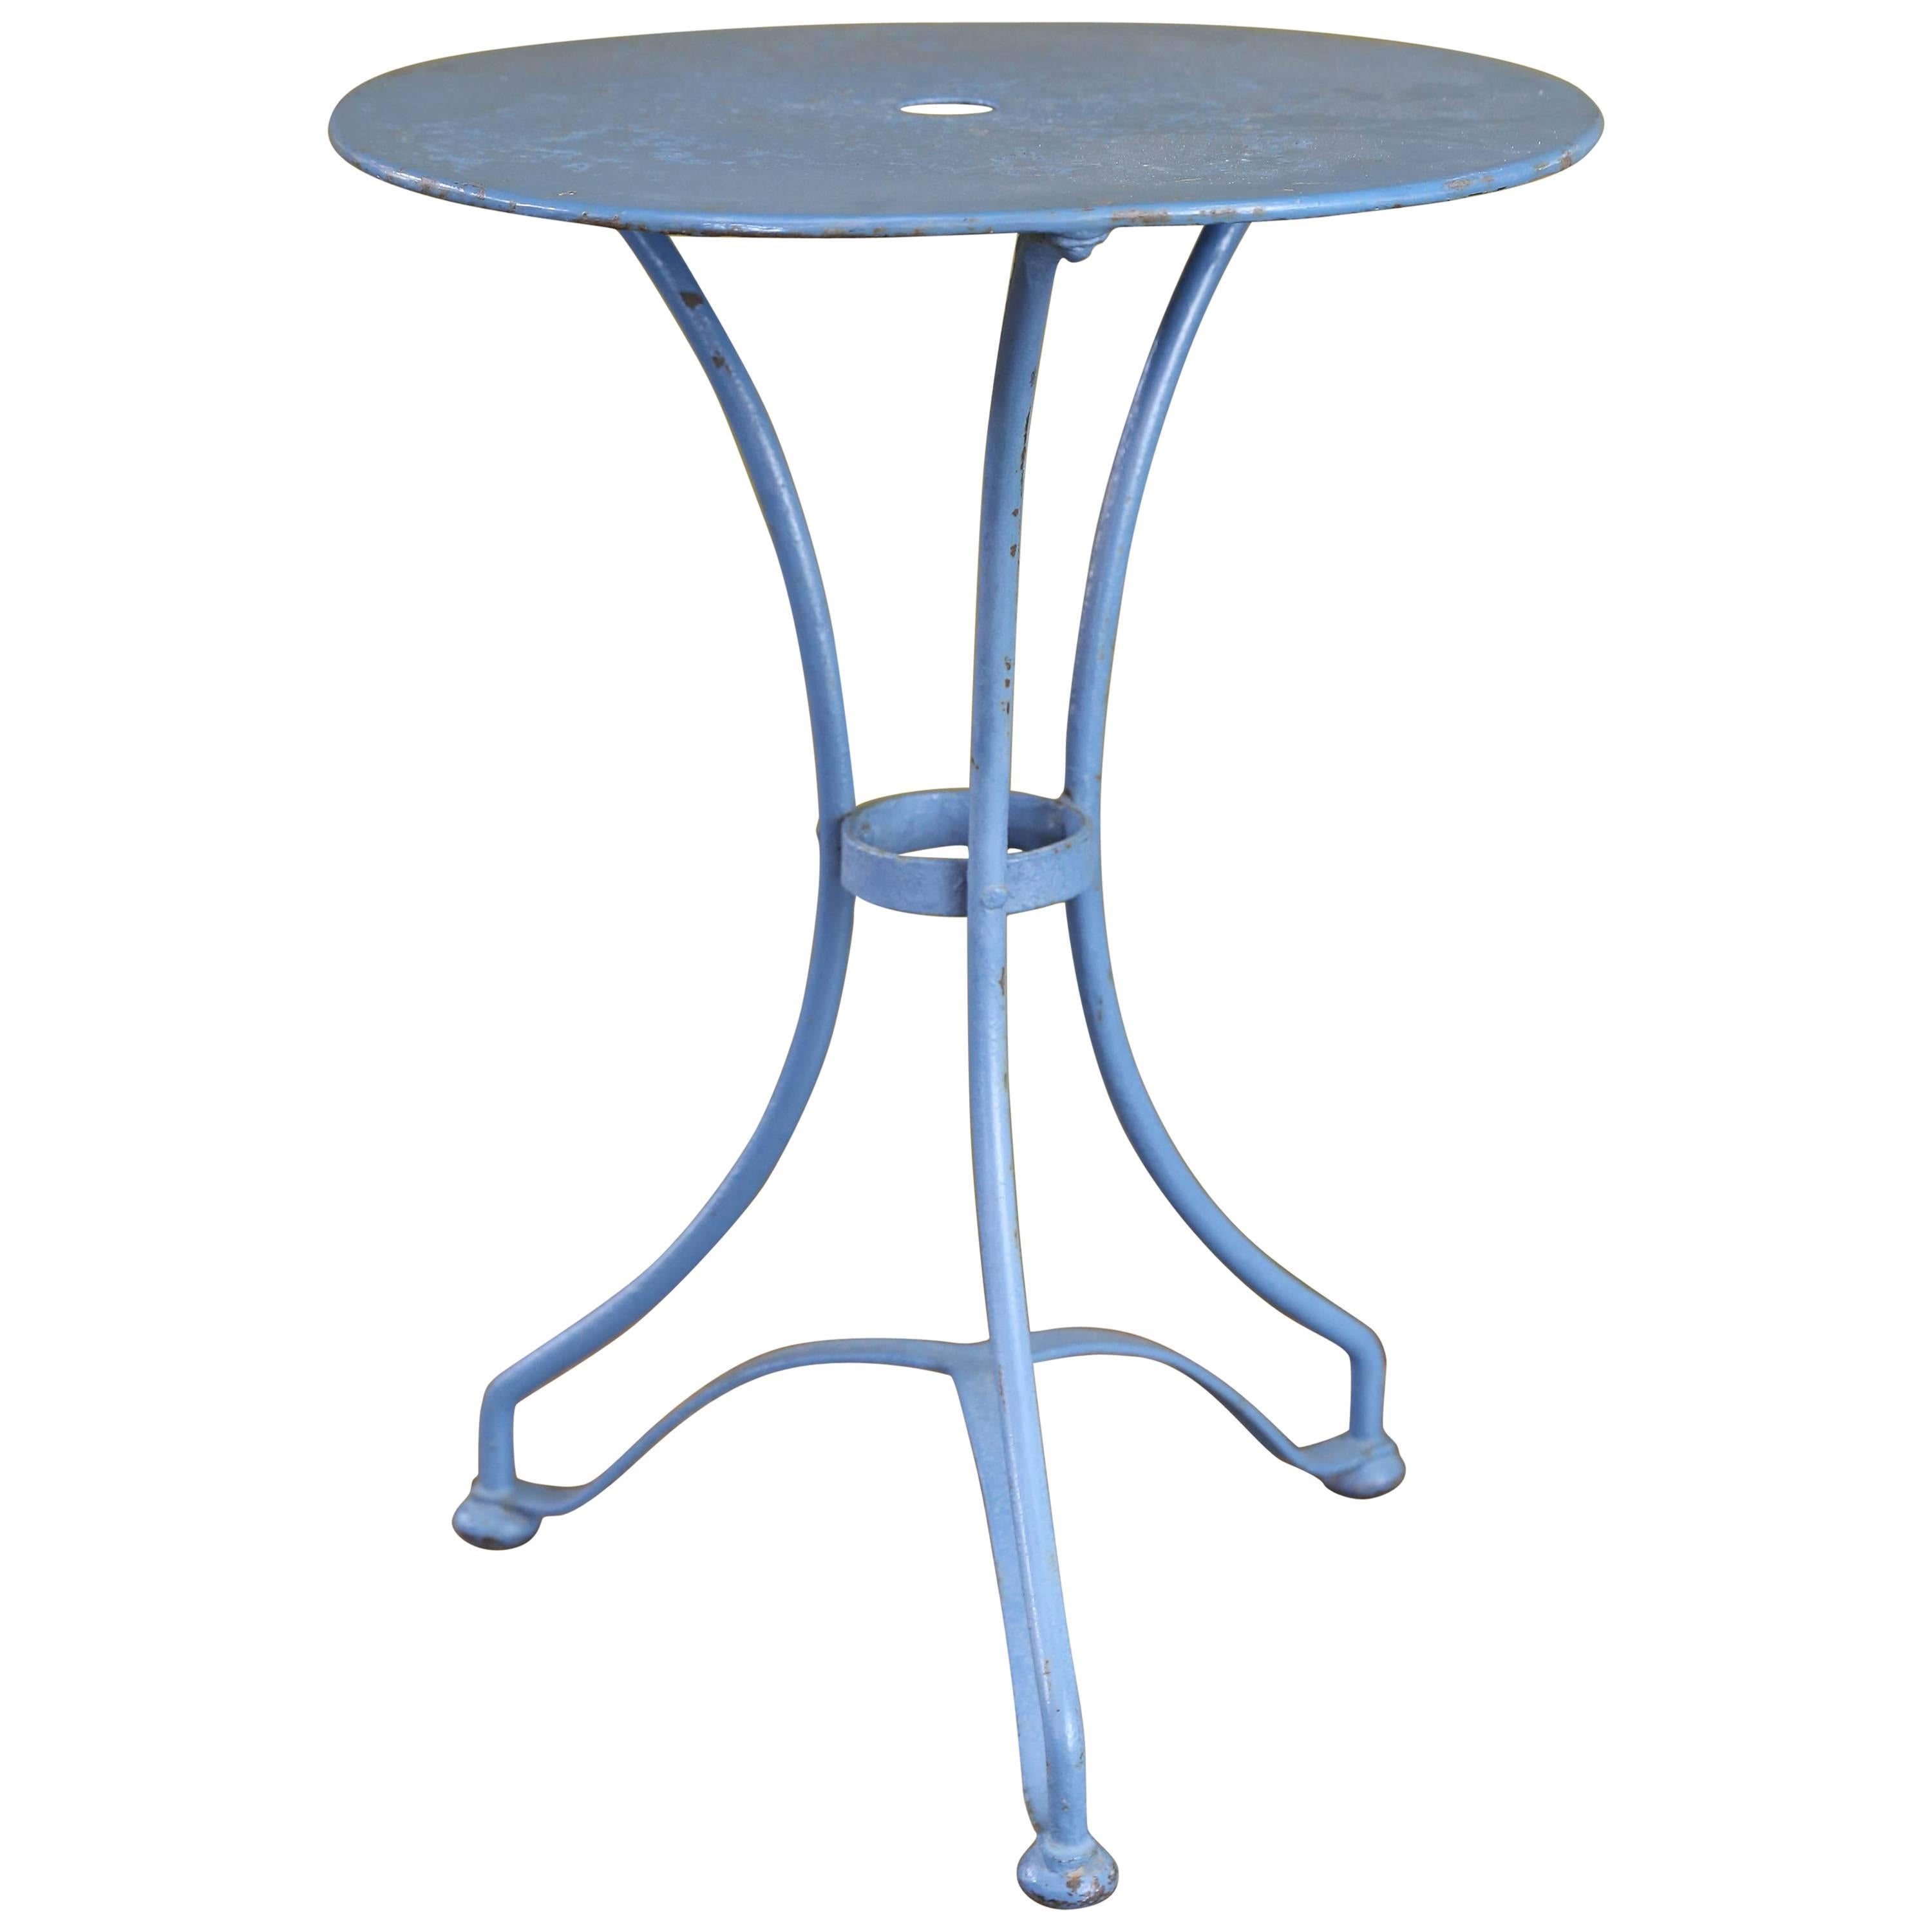 Blue Metal  Bistro Table with Gueridon Style Legs from France, circa 1960